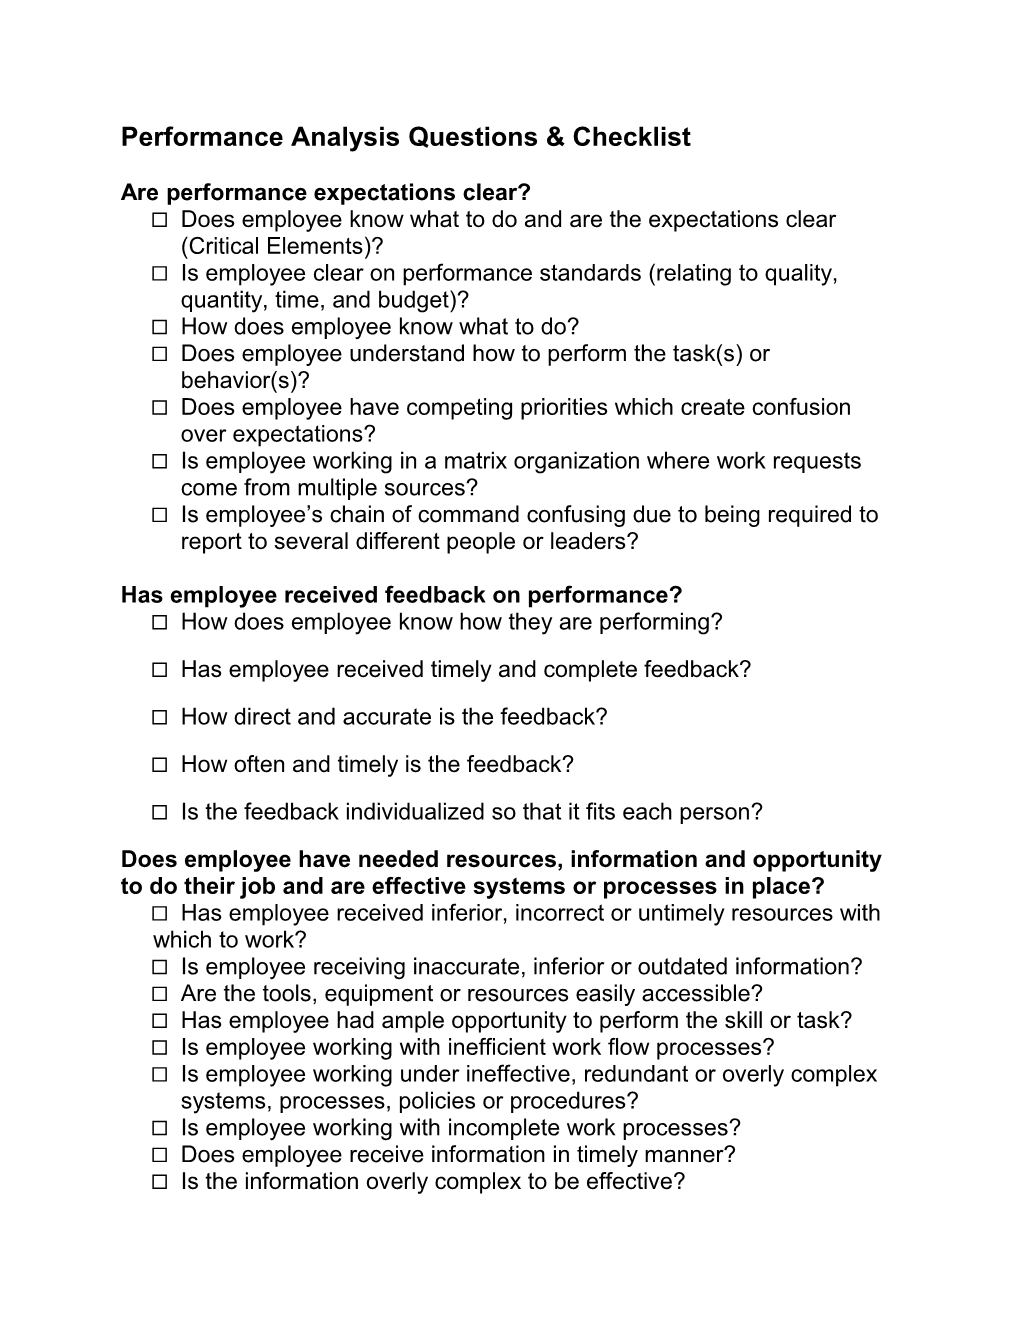 Performance Analysis Questions & Checklist